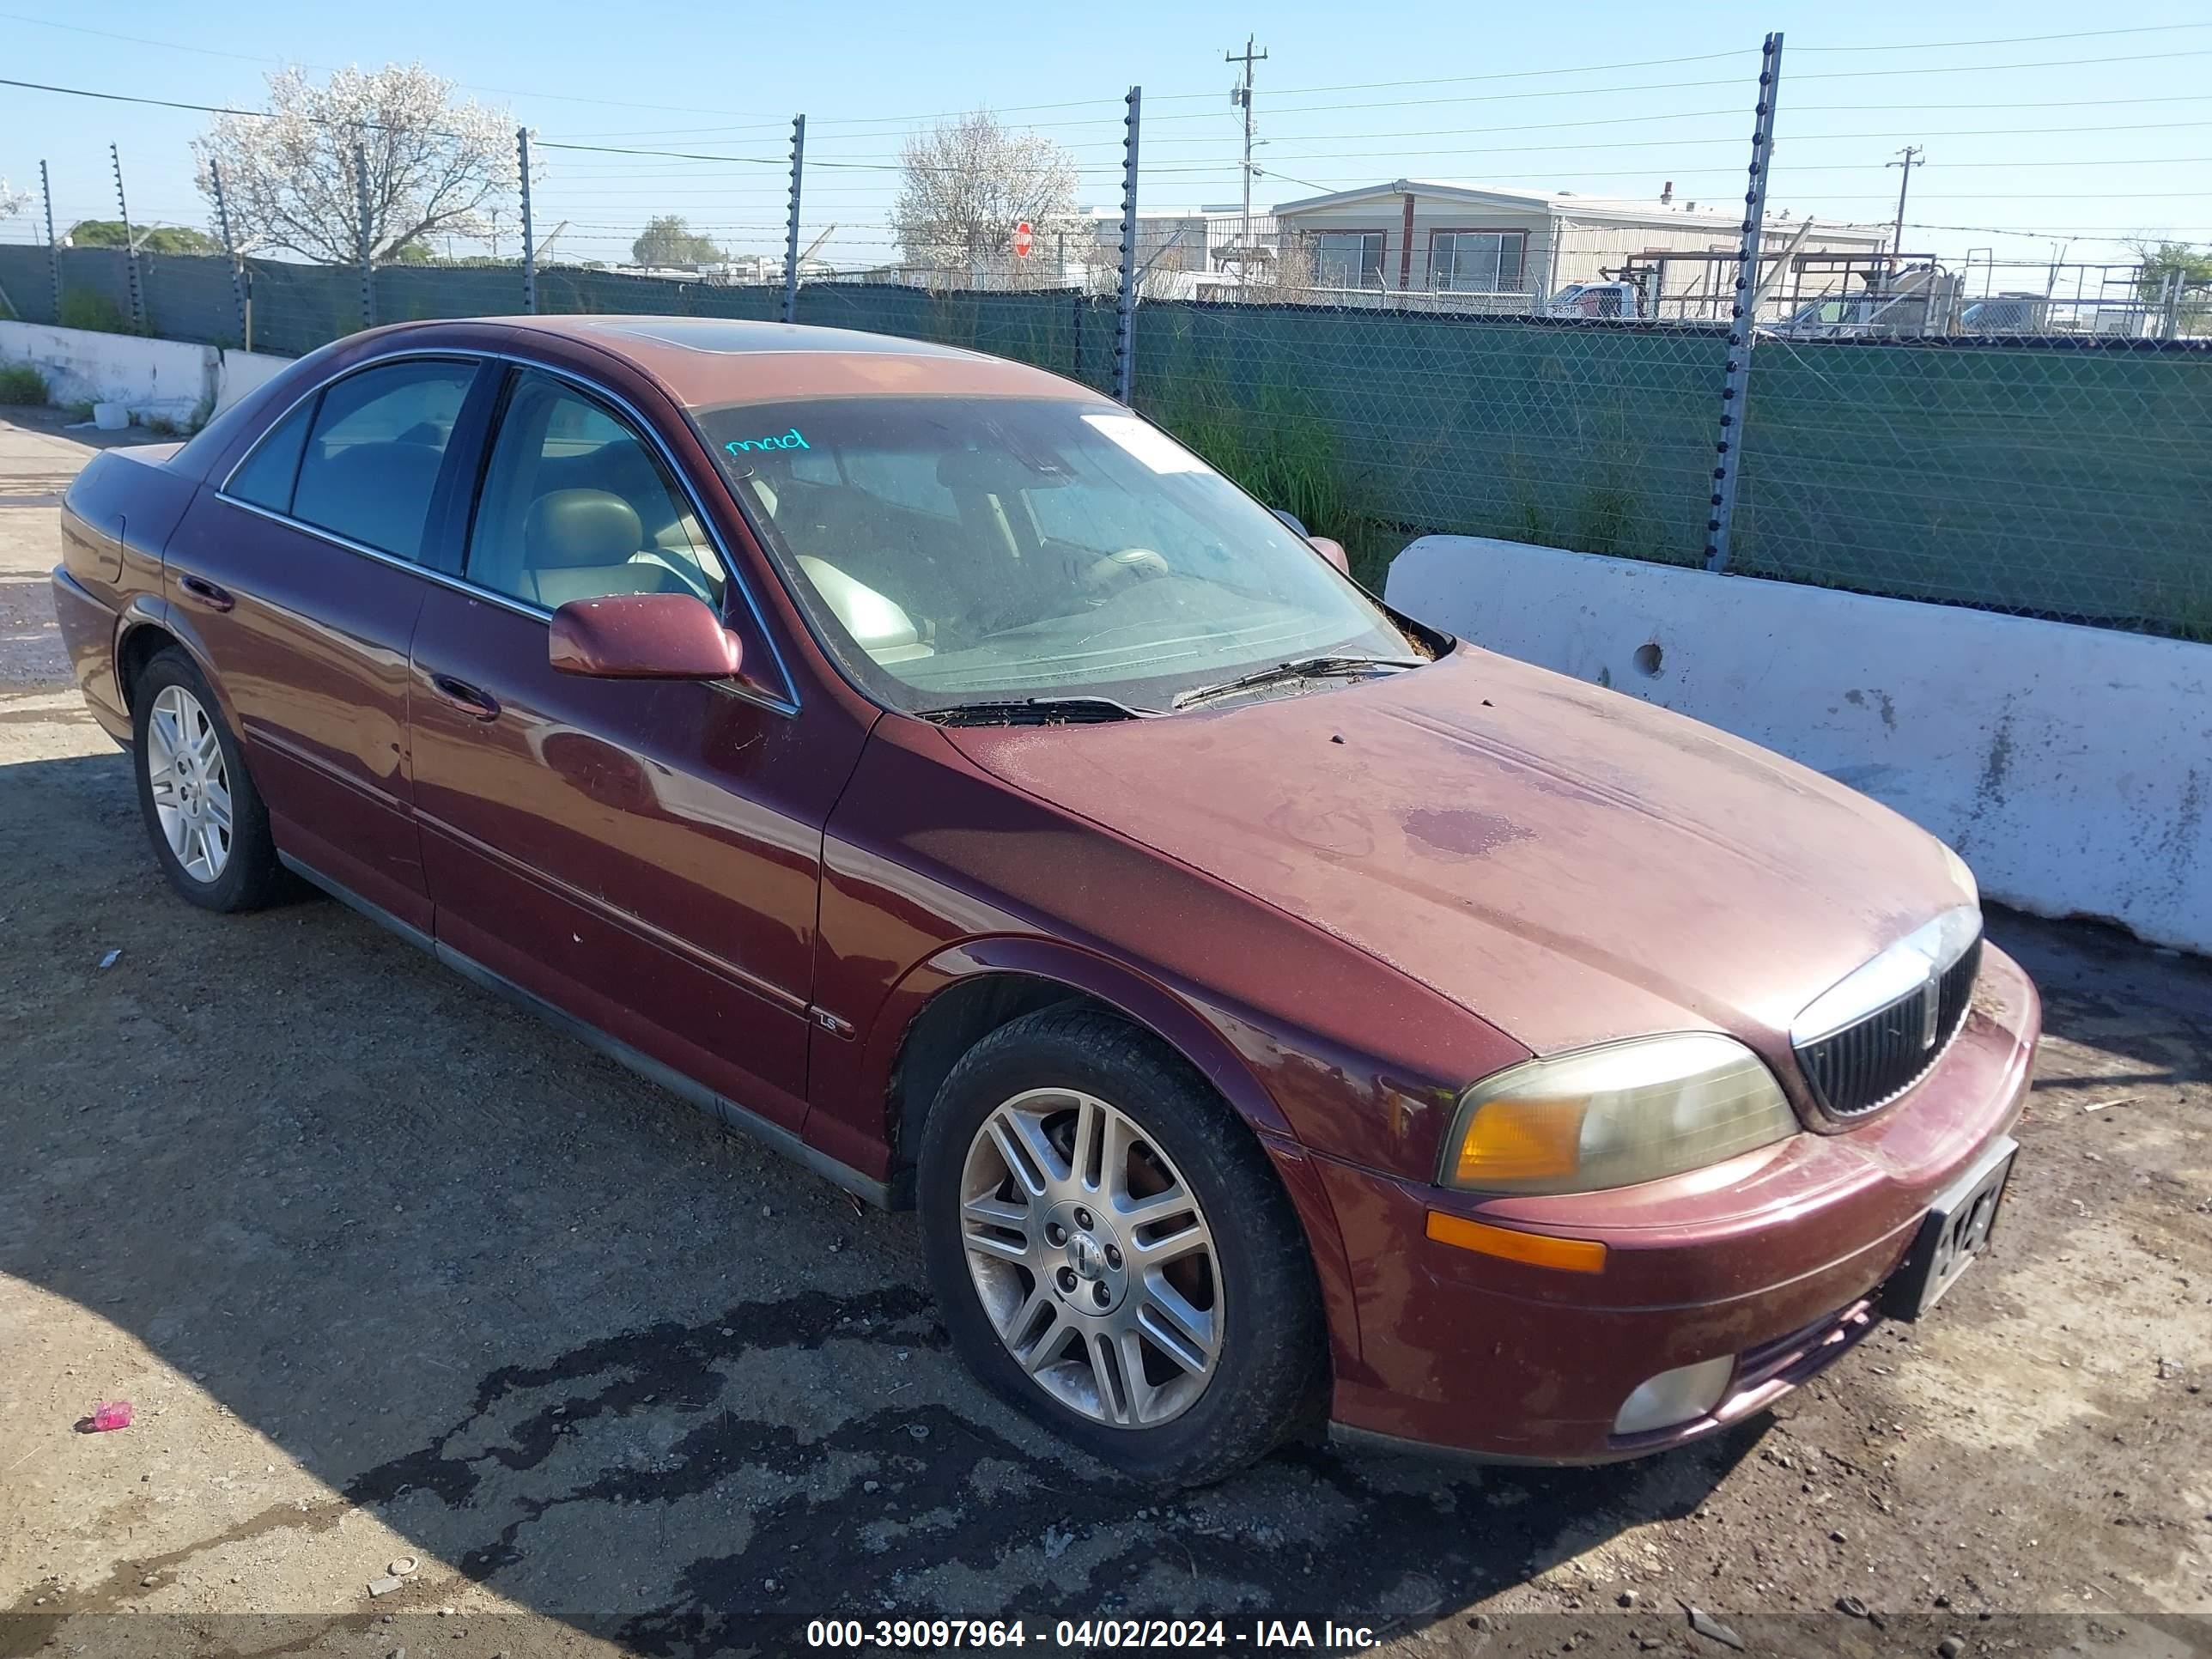 vin: 1LNHM87A71Y660135 1LNHM87A71Y660135 2001 lincoln ls 3900 for Sale in 94565, 2780 Willow Pass Road, Bay Point, California, USA